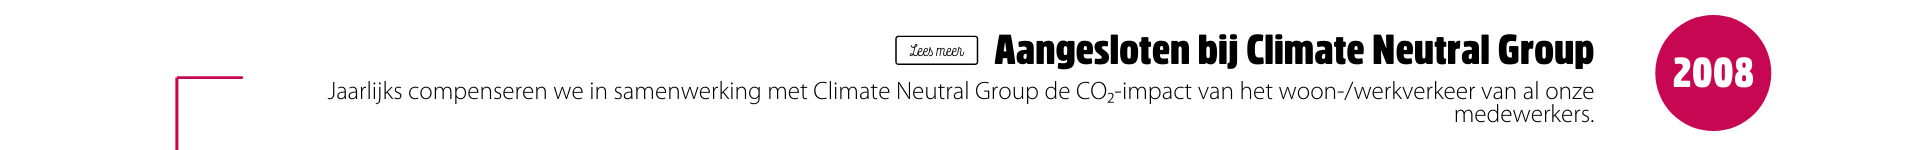 6-Climate neutral group 2008